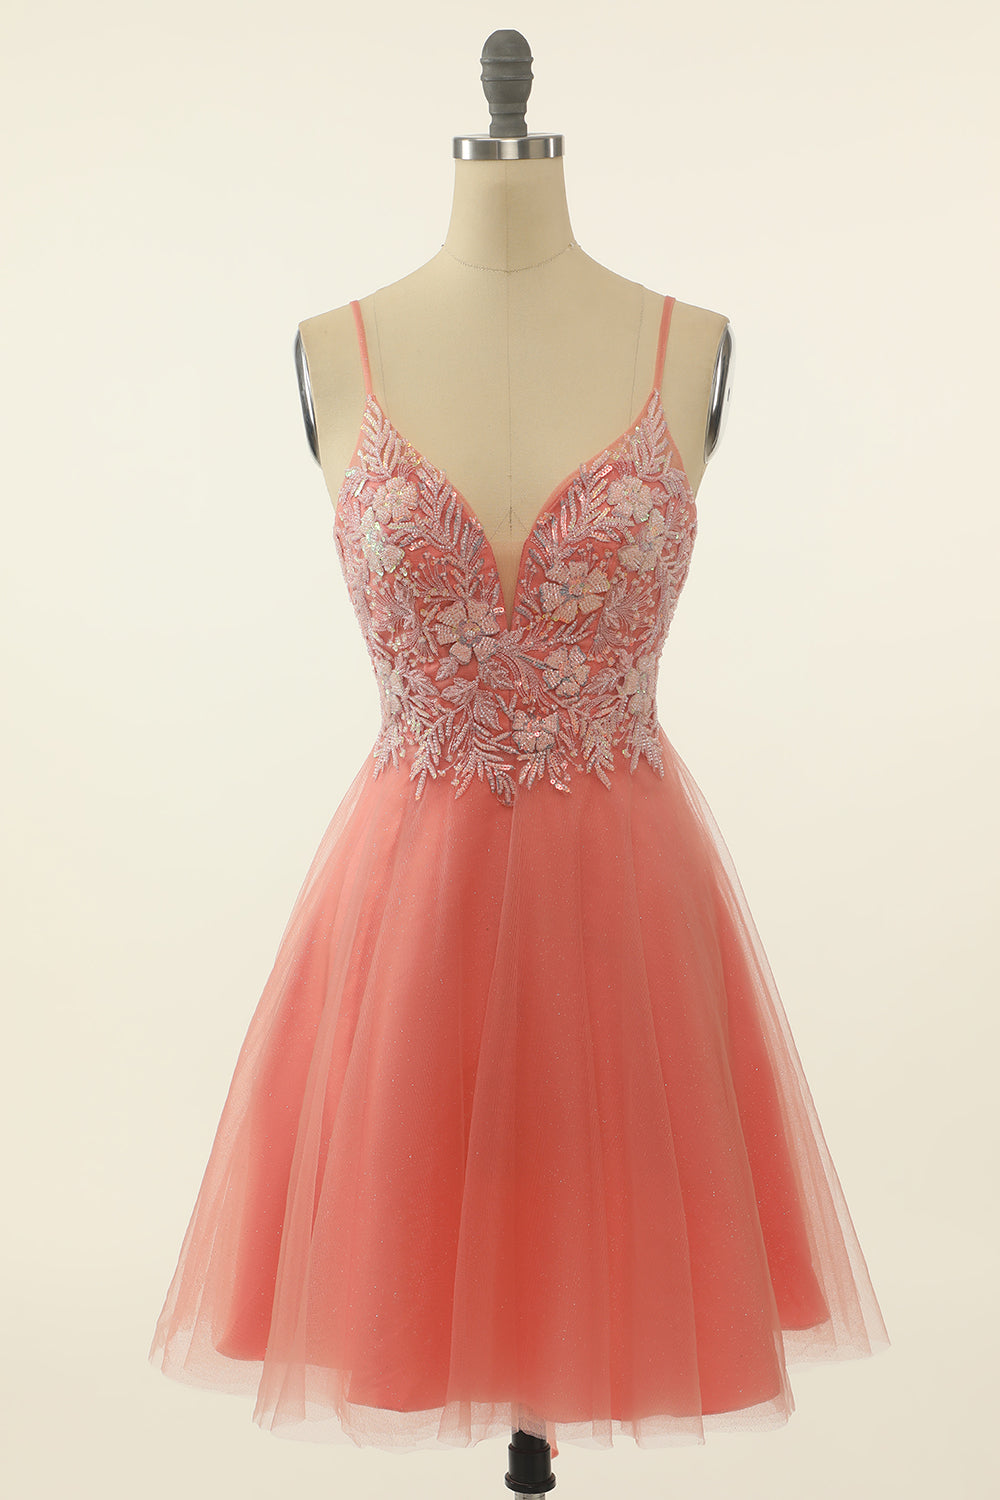 Prom Dresses Ball Gown Elegant, Blush Appliques Tulle Cute Homecoming Dress